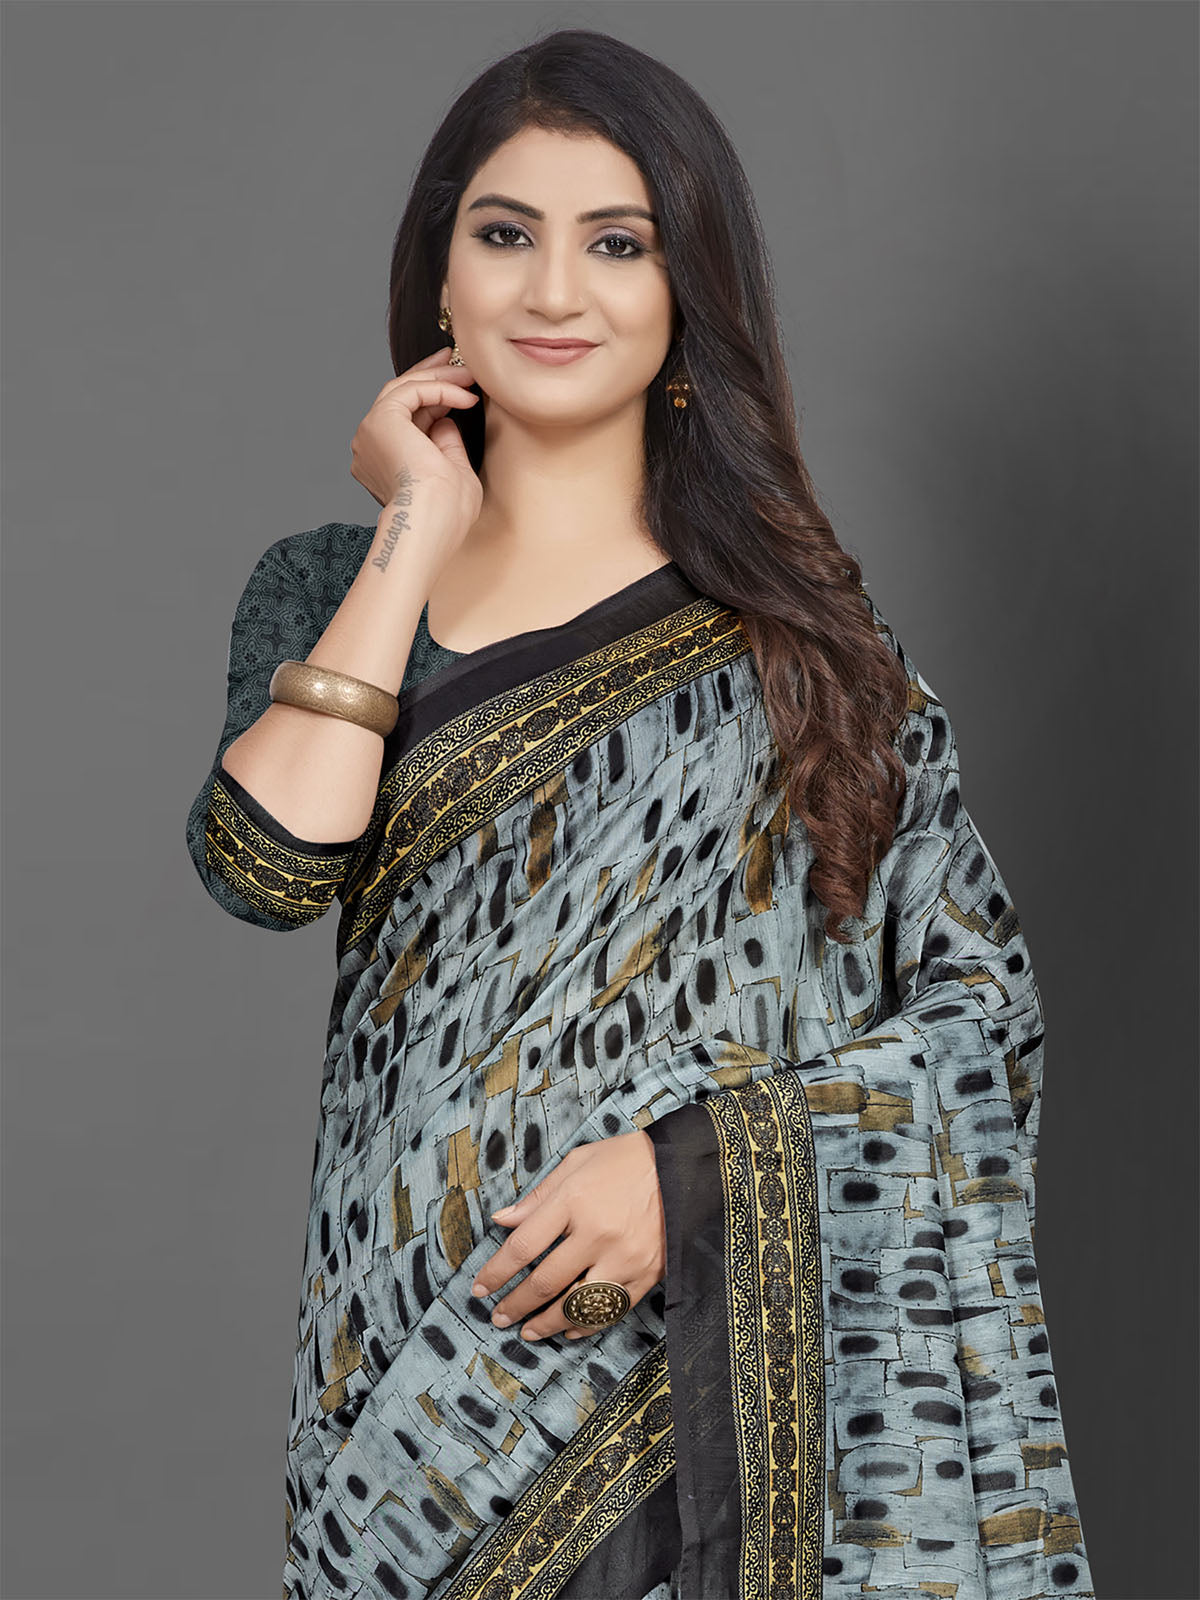 Women'S Cotton Blend Grey Printed Saree With Unstitched Blouse